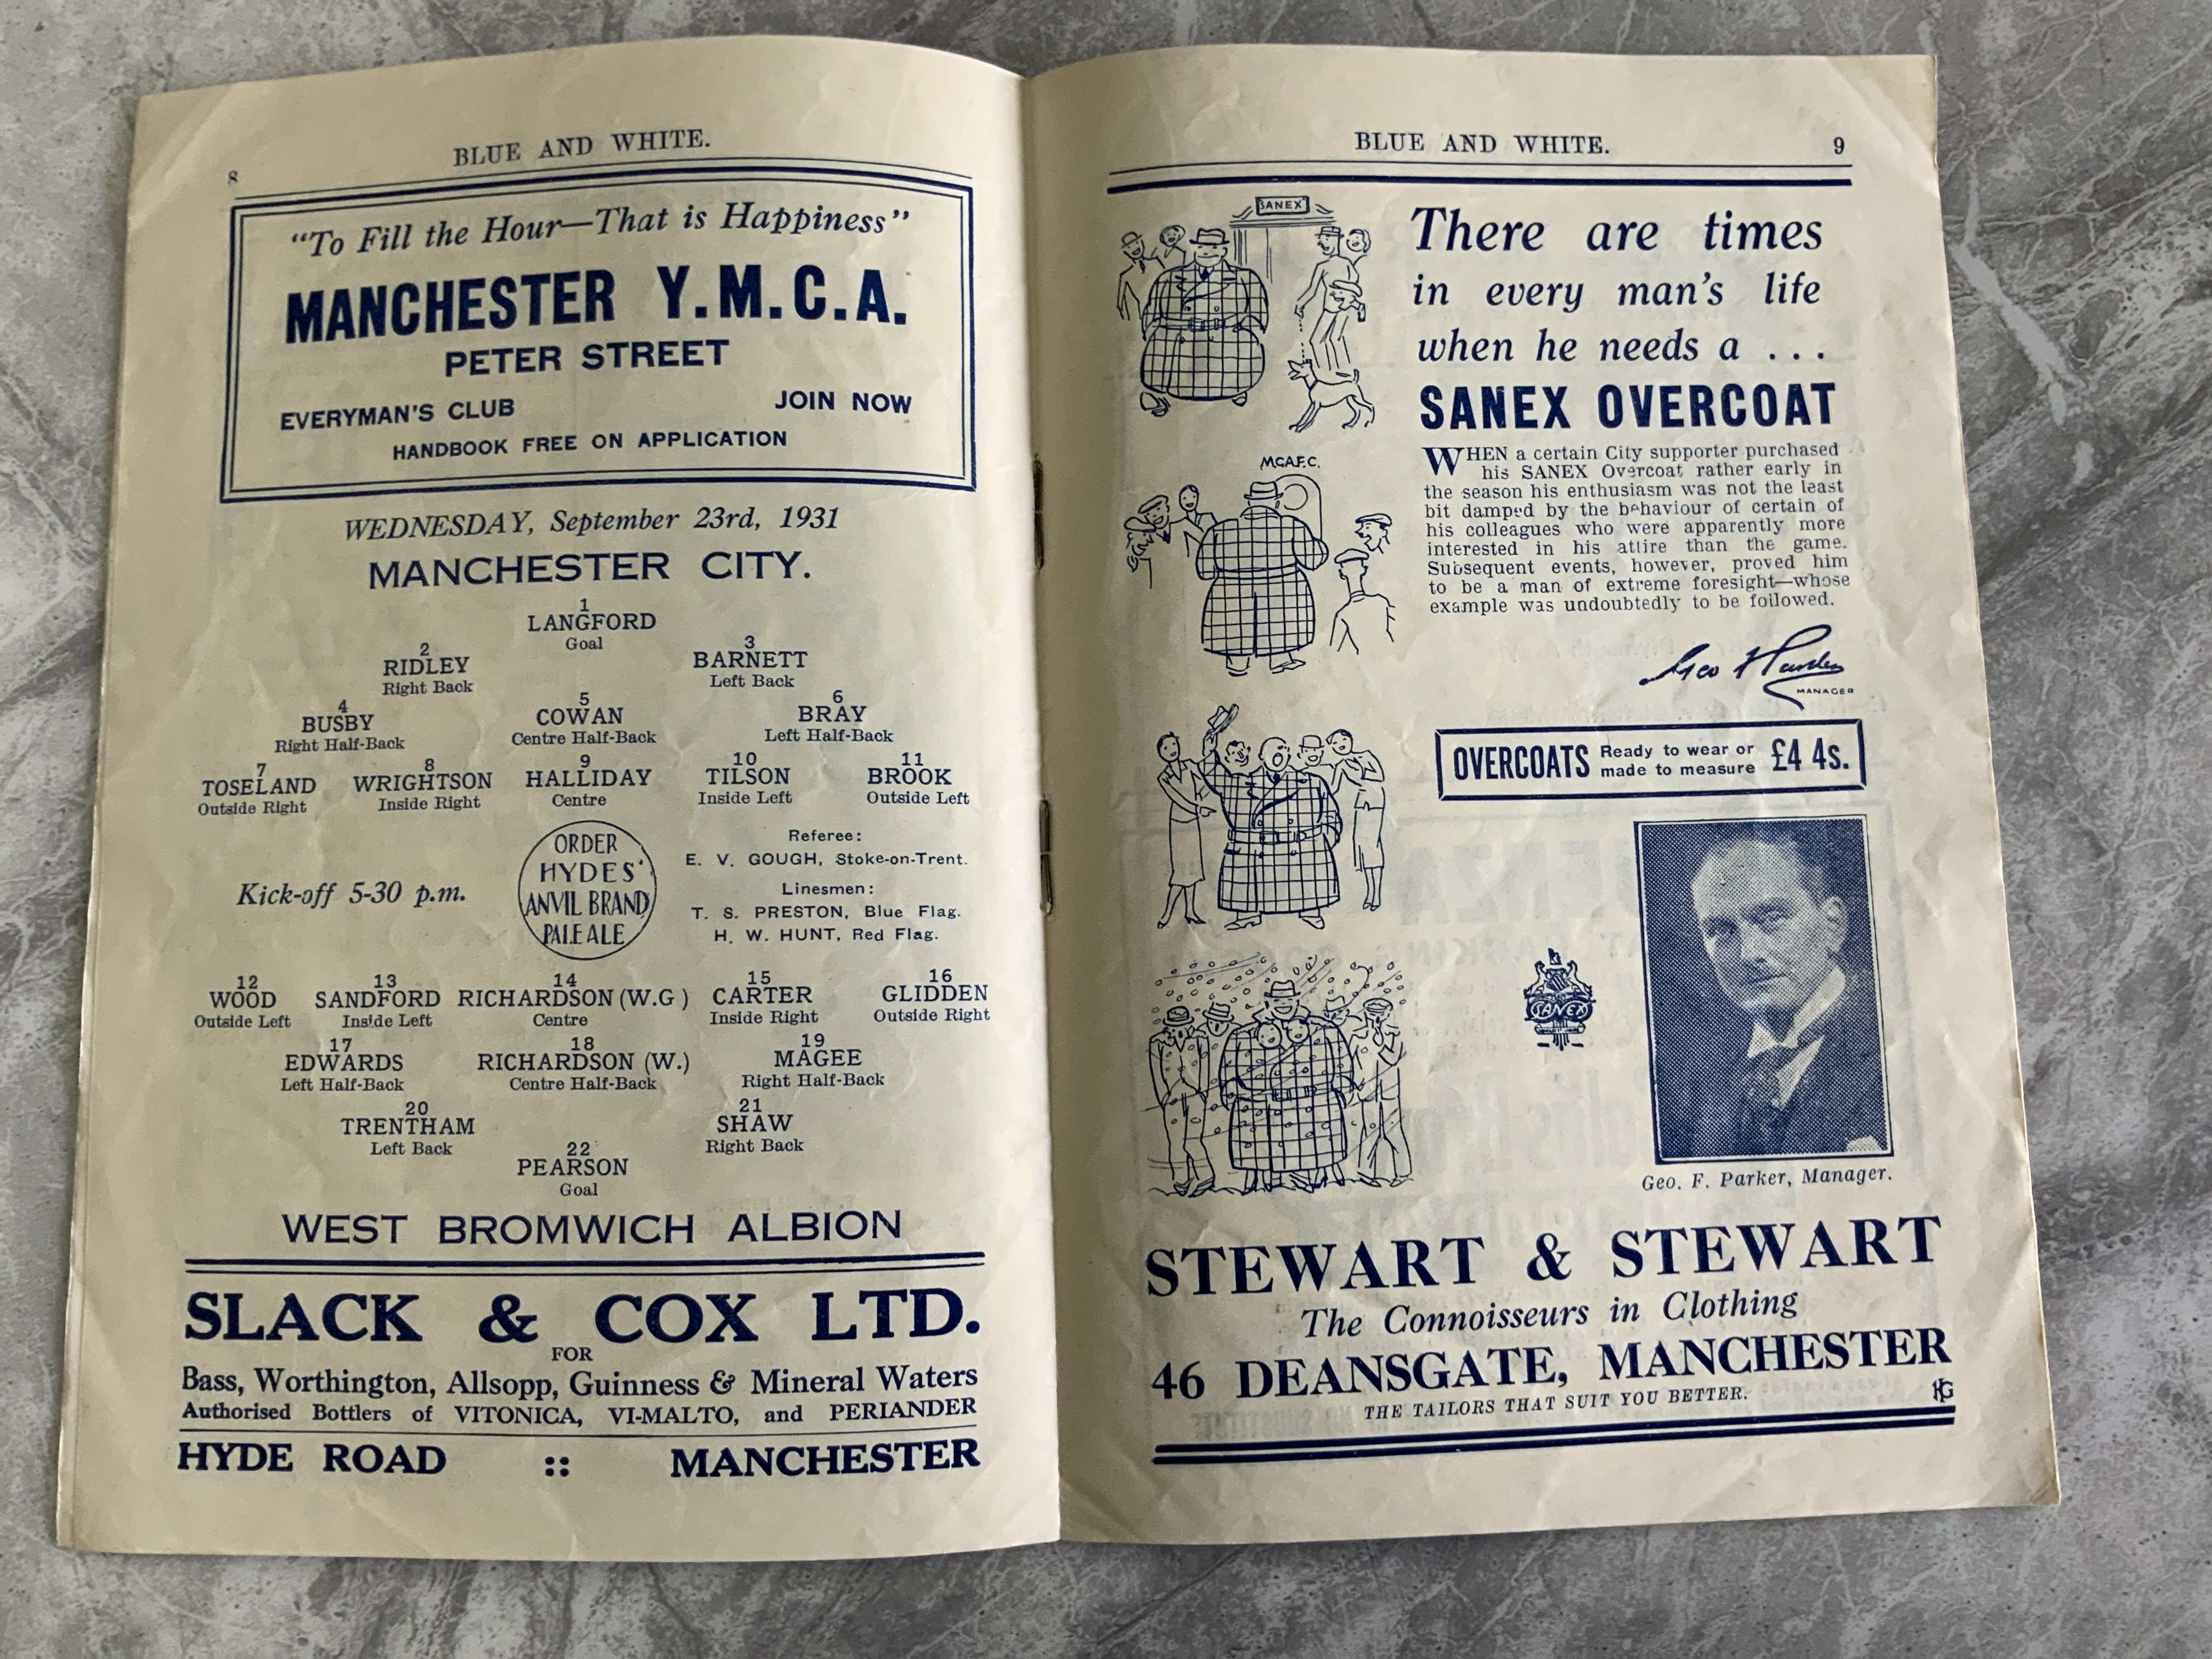 31/32 Manchester City v West Brom Football Programme: Very good condition with no team changes. - Image 2 of 2